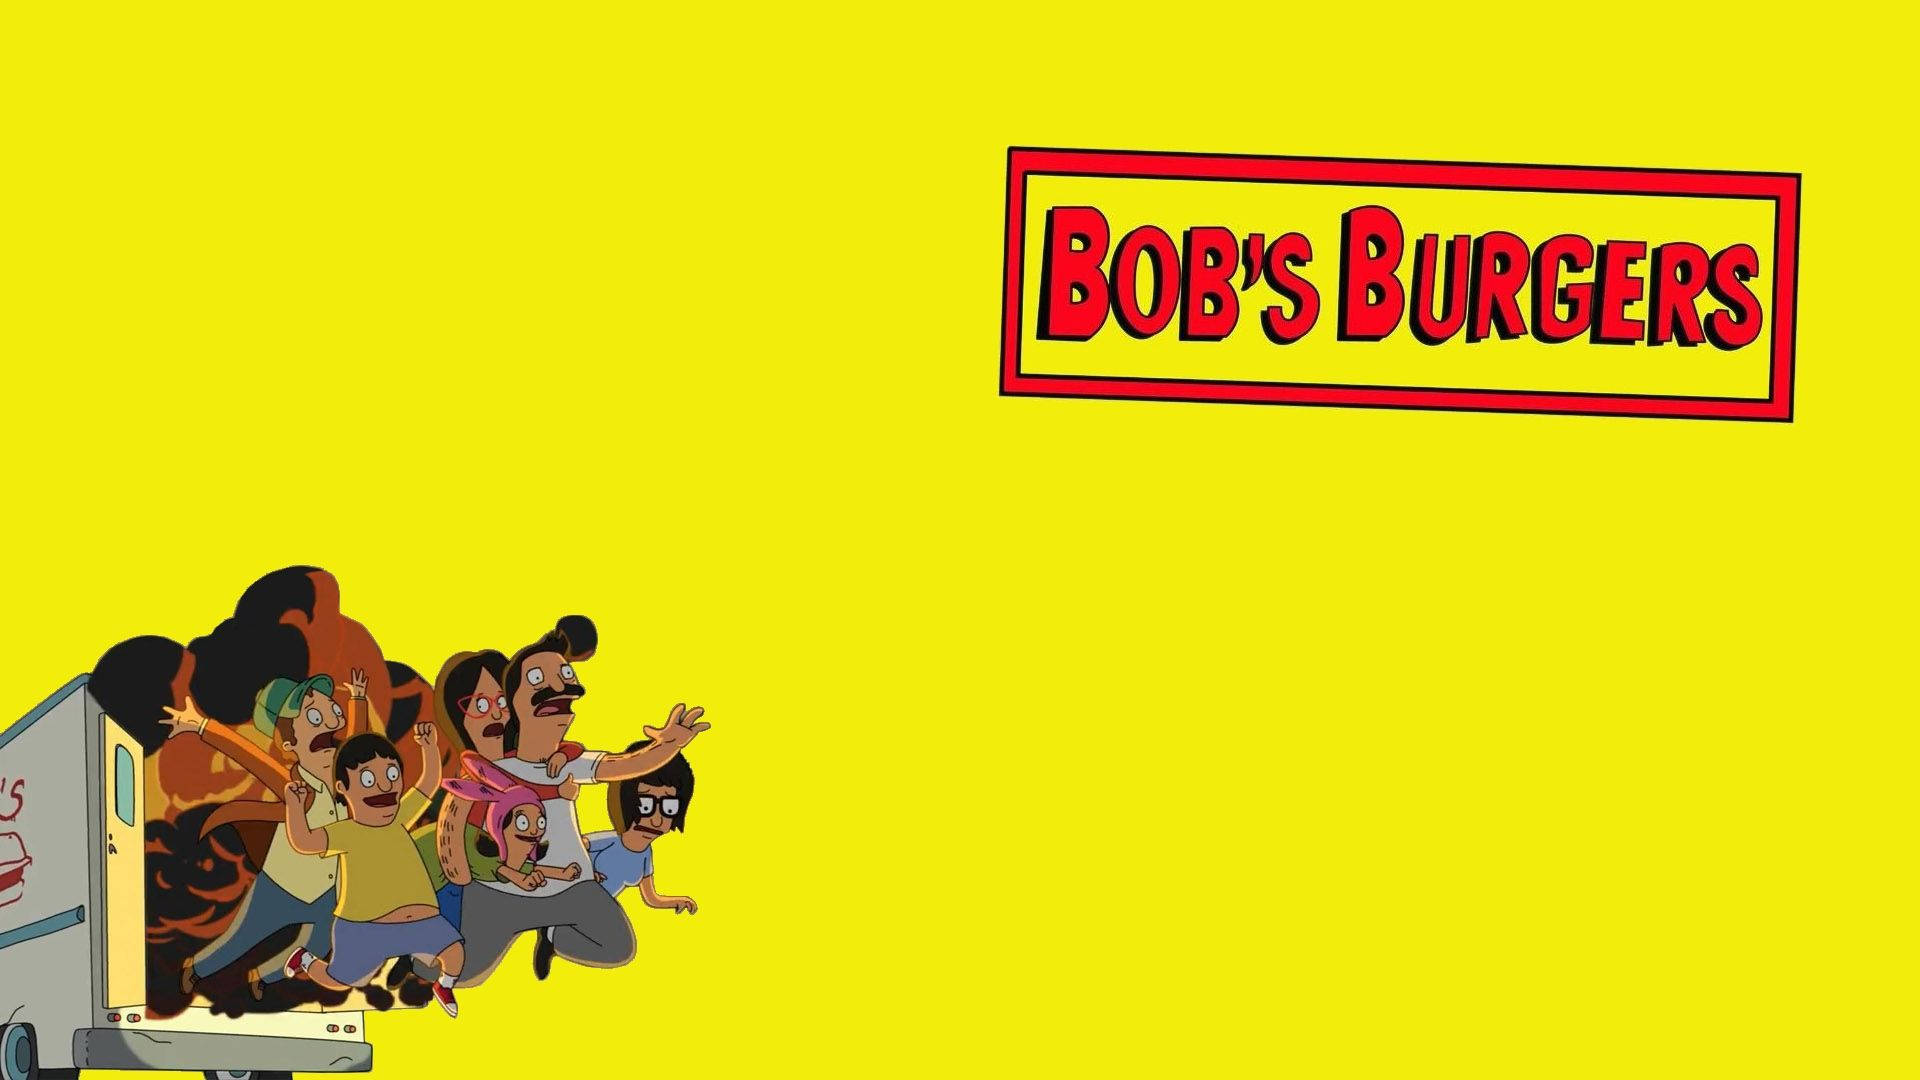 Bobs Burgers Food Truck On Fire Background